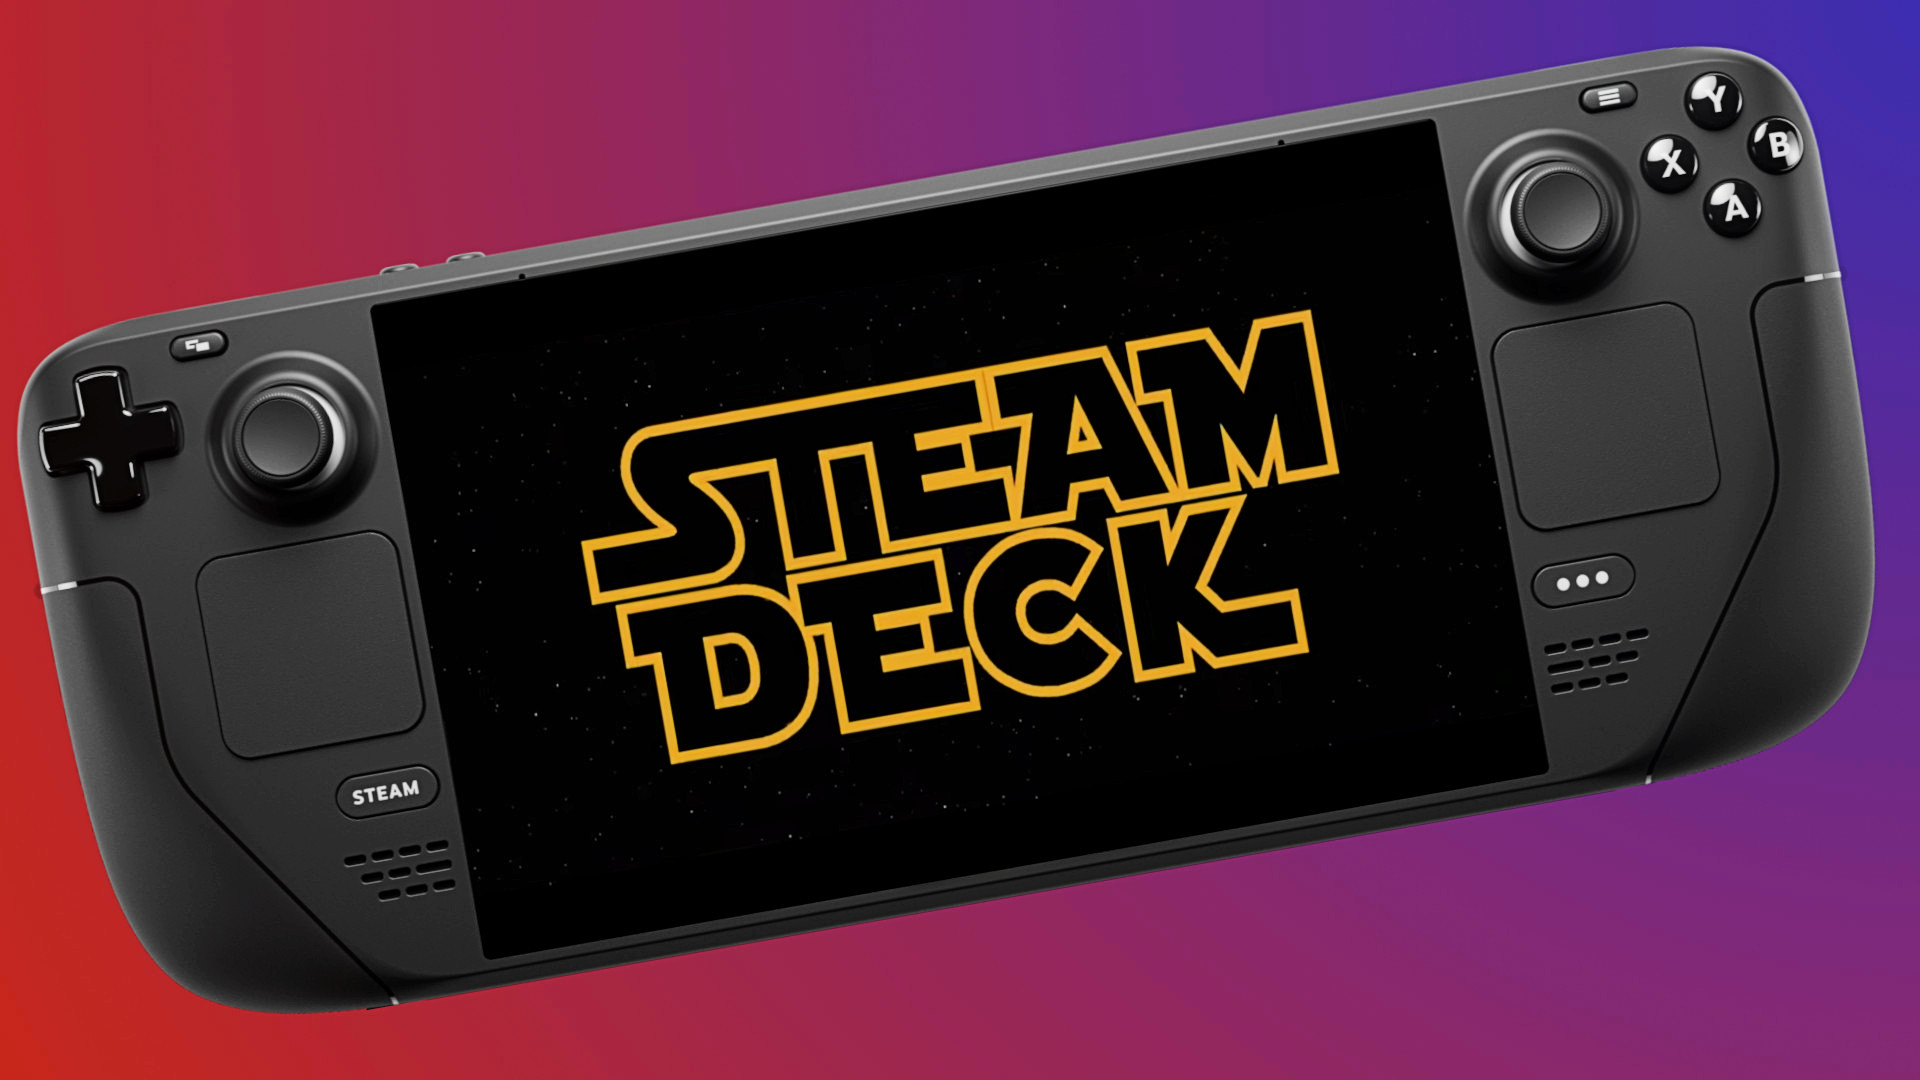 Steam Deck mod gives the handheld gaming PC a Star Wars flair